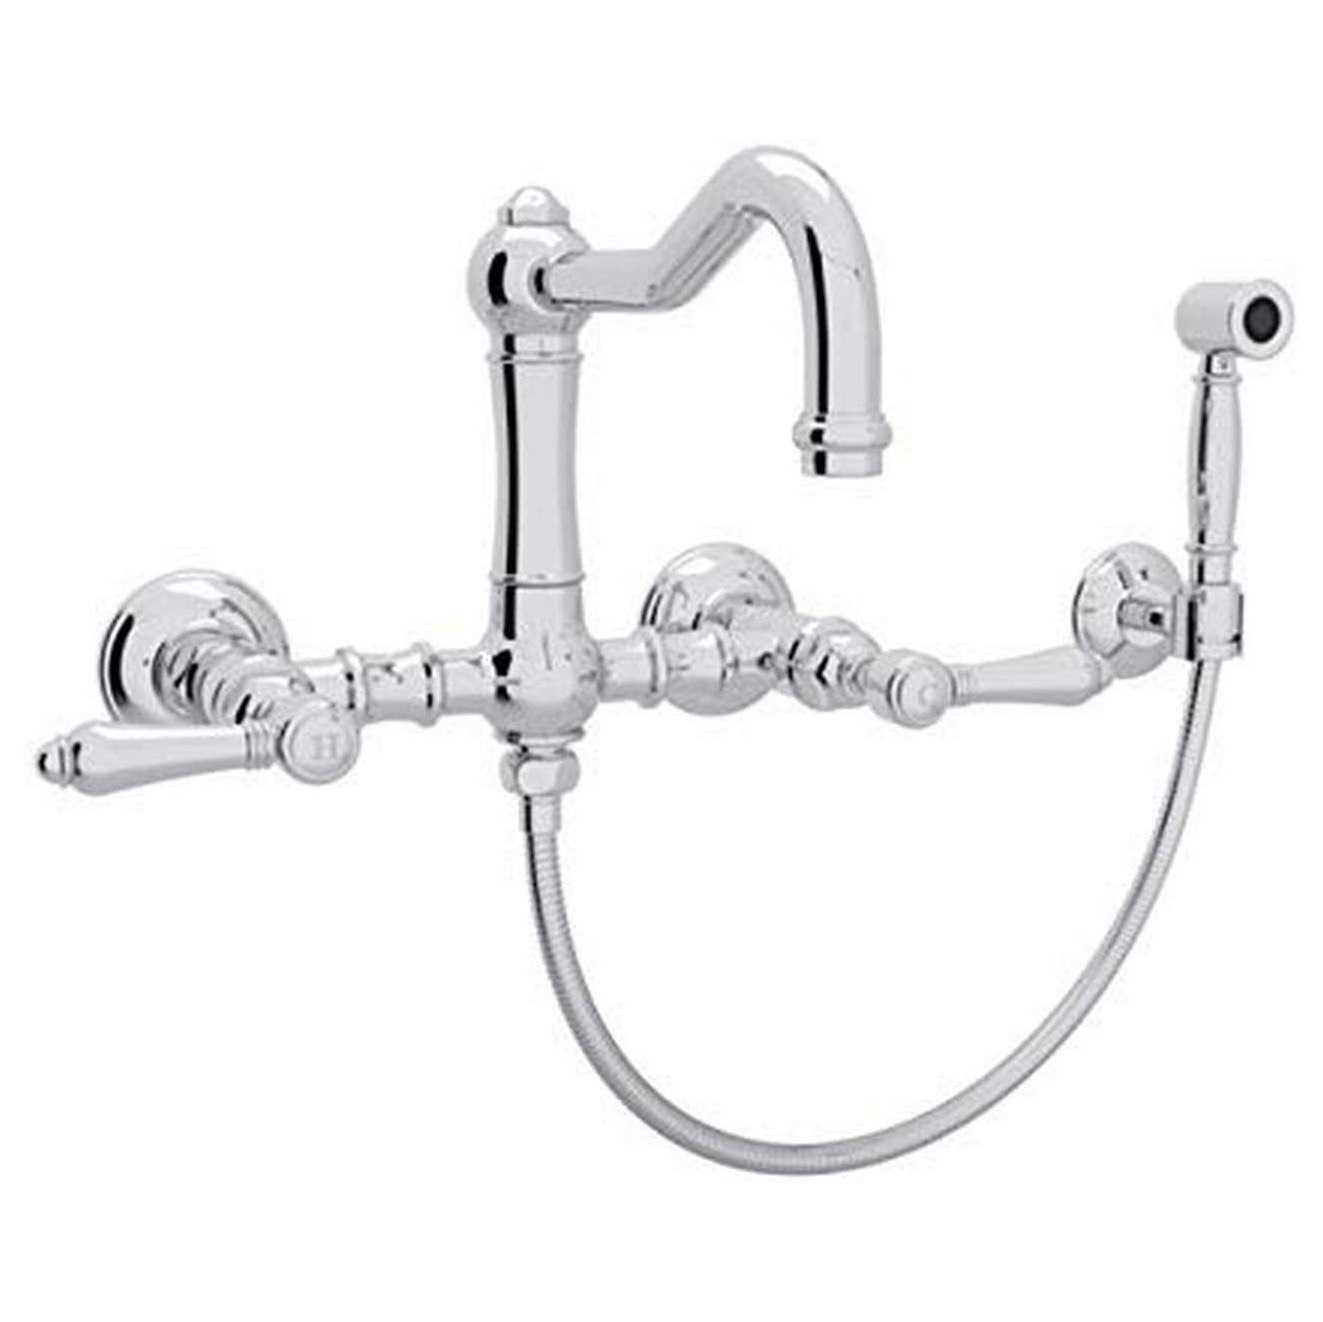 Country Bridge Faucet w/Spray & Lever Handles in Polished Chrome